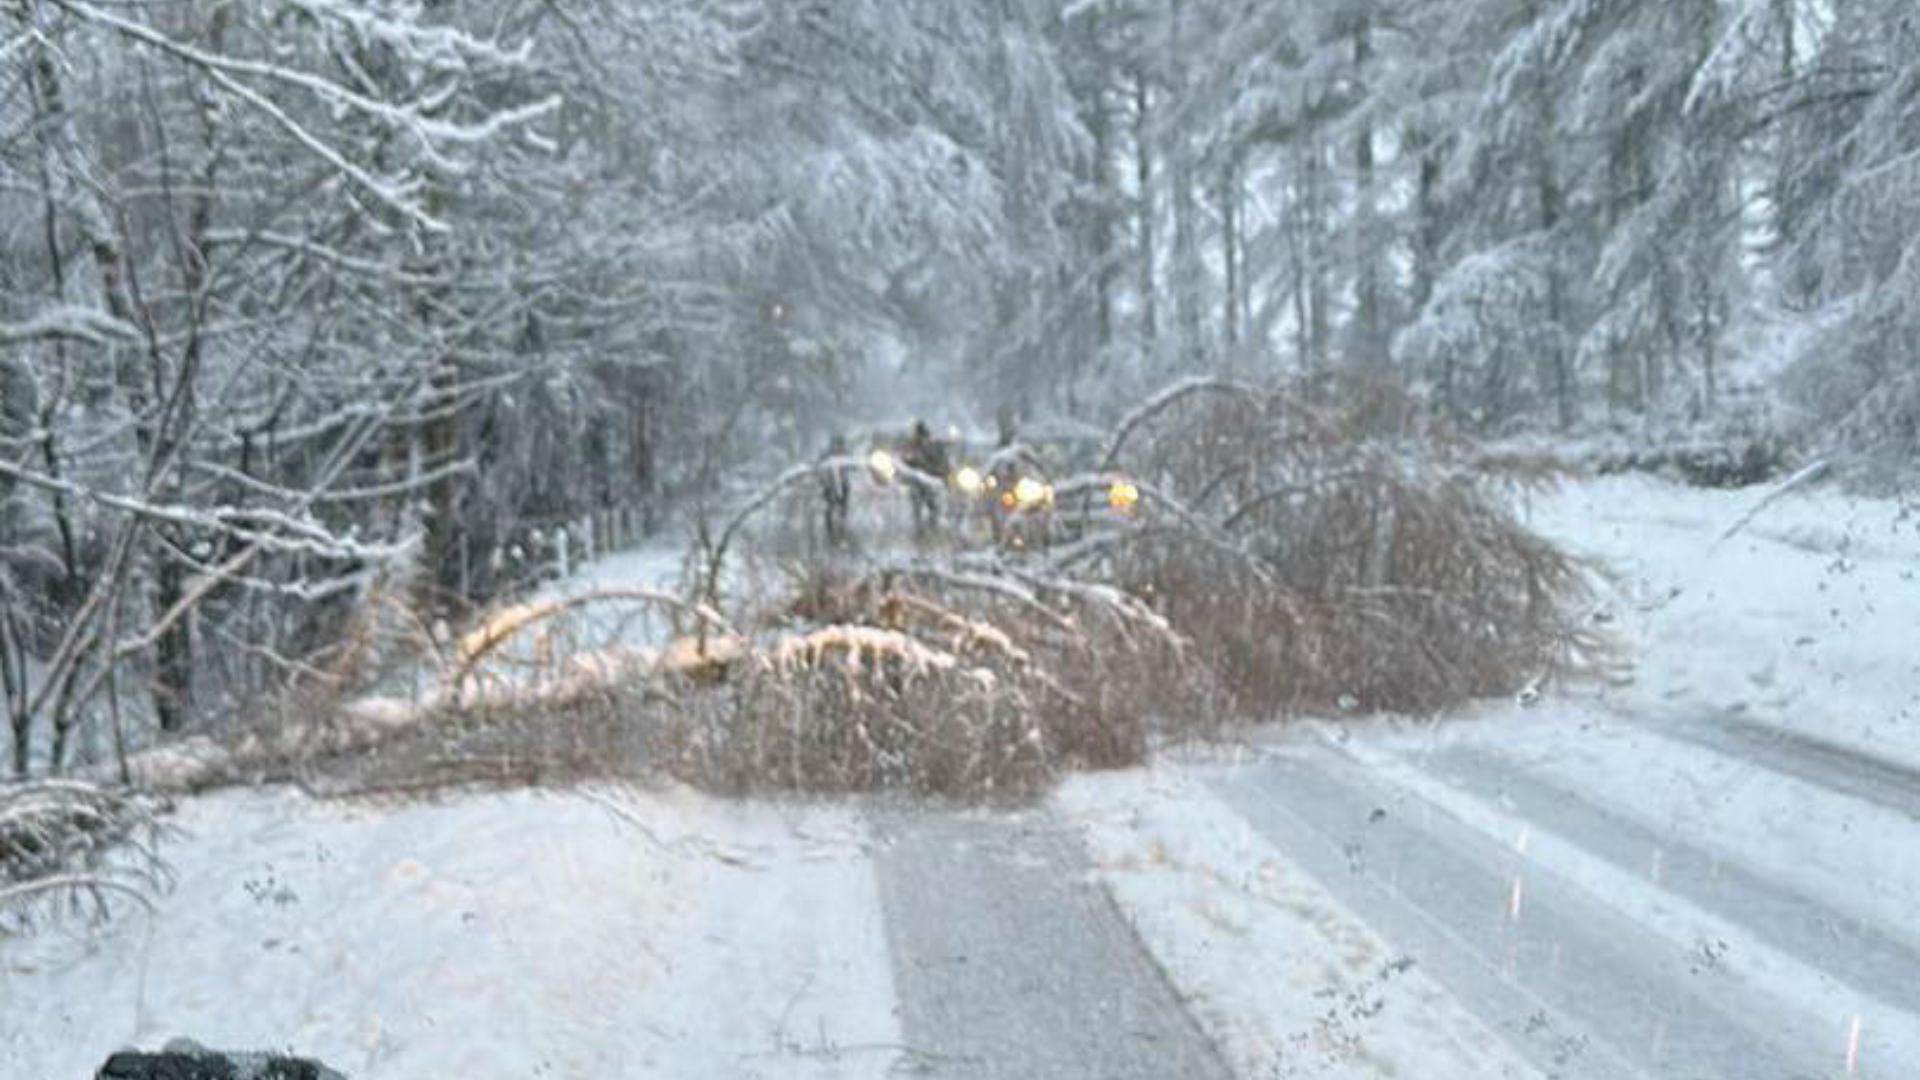 The road between Tillyfourie and Millbank was blocked by a fallen tree, reported Fubar News, after Arctic temperatures left a covering of snow across the Aberdeenshire.